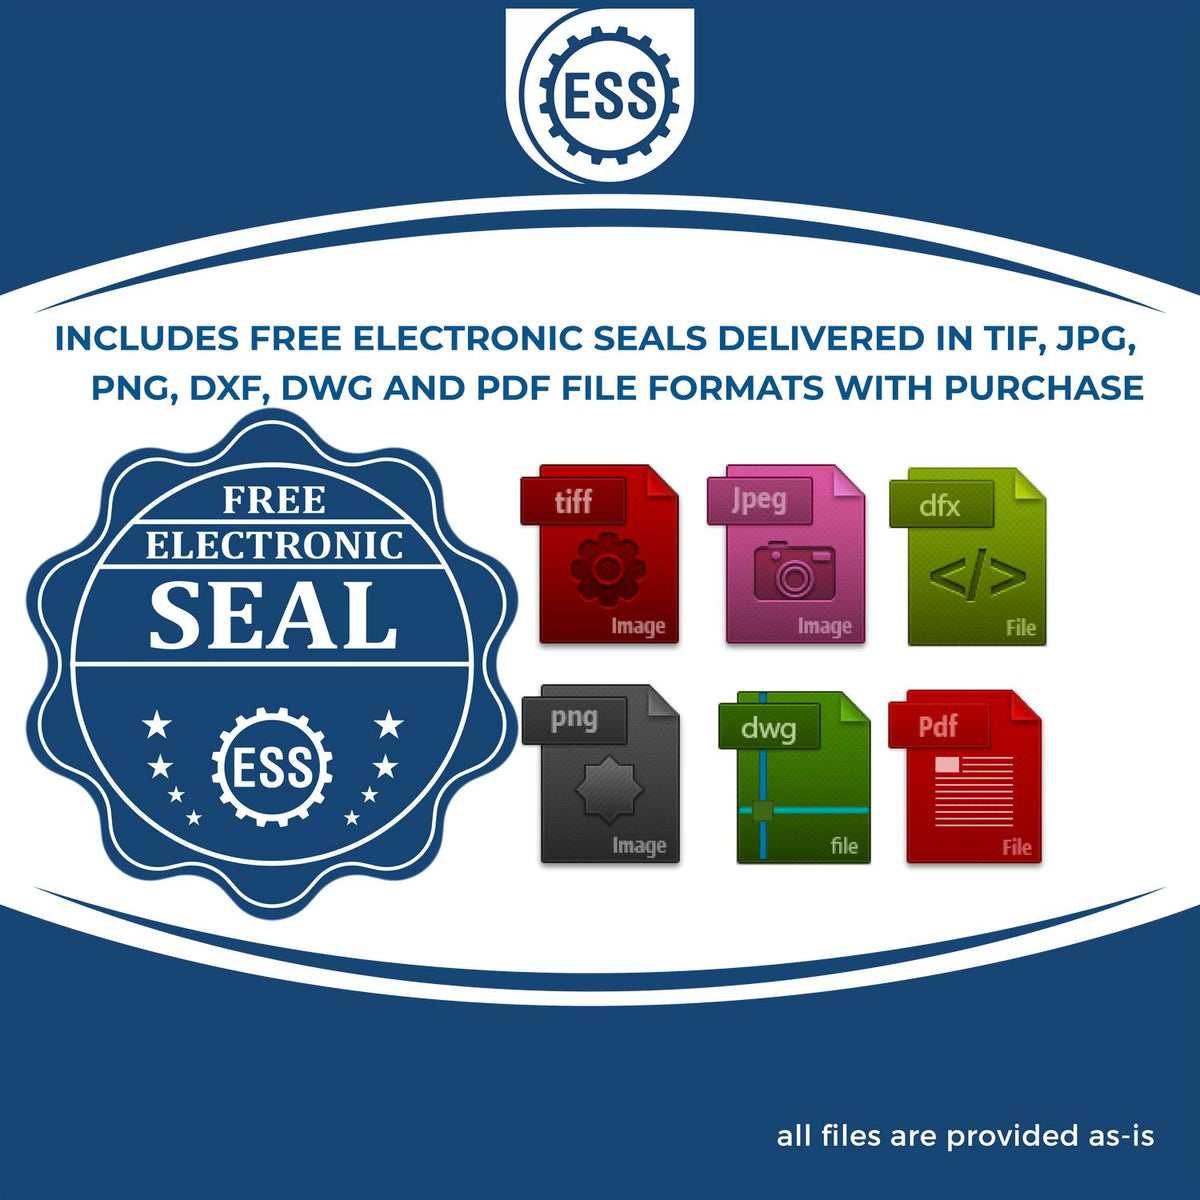 An infographic for the free electronic seal for the Gift Texas Landscape Architect Seal illustrating the different file type icons such as DXF, DWG, TIF, JPG and PNG.